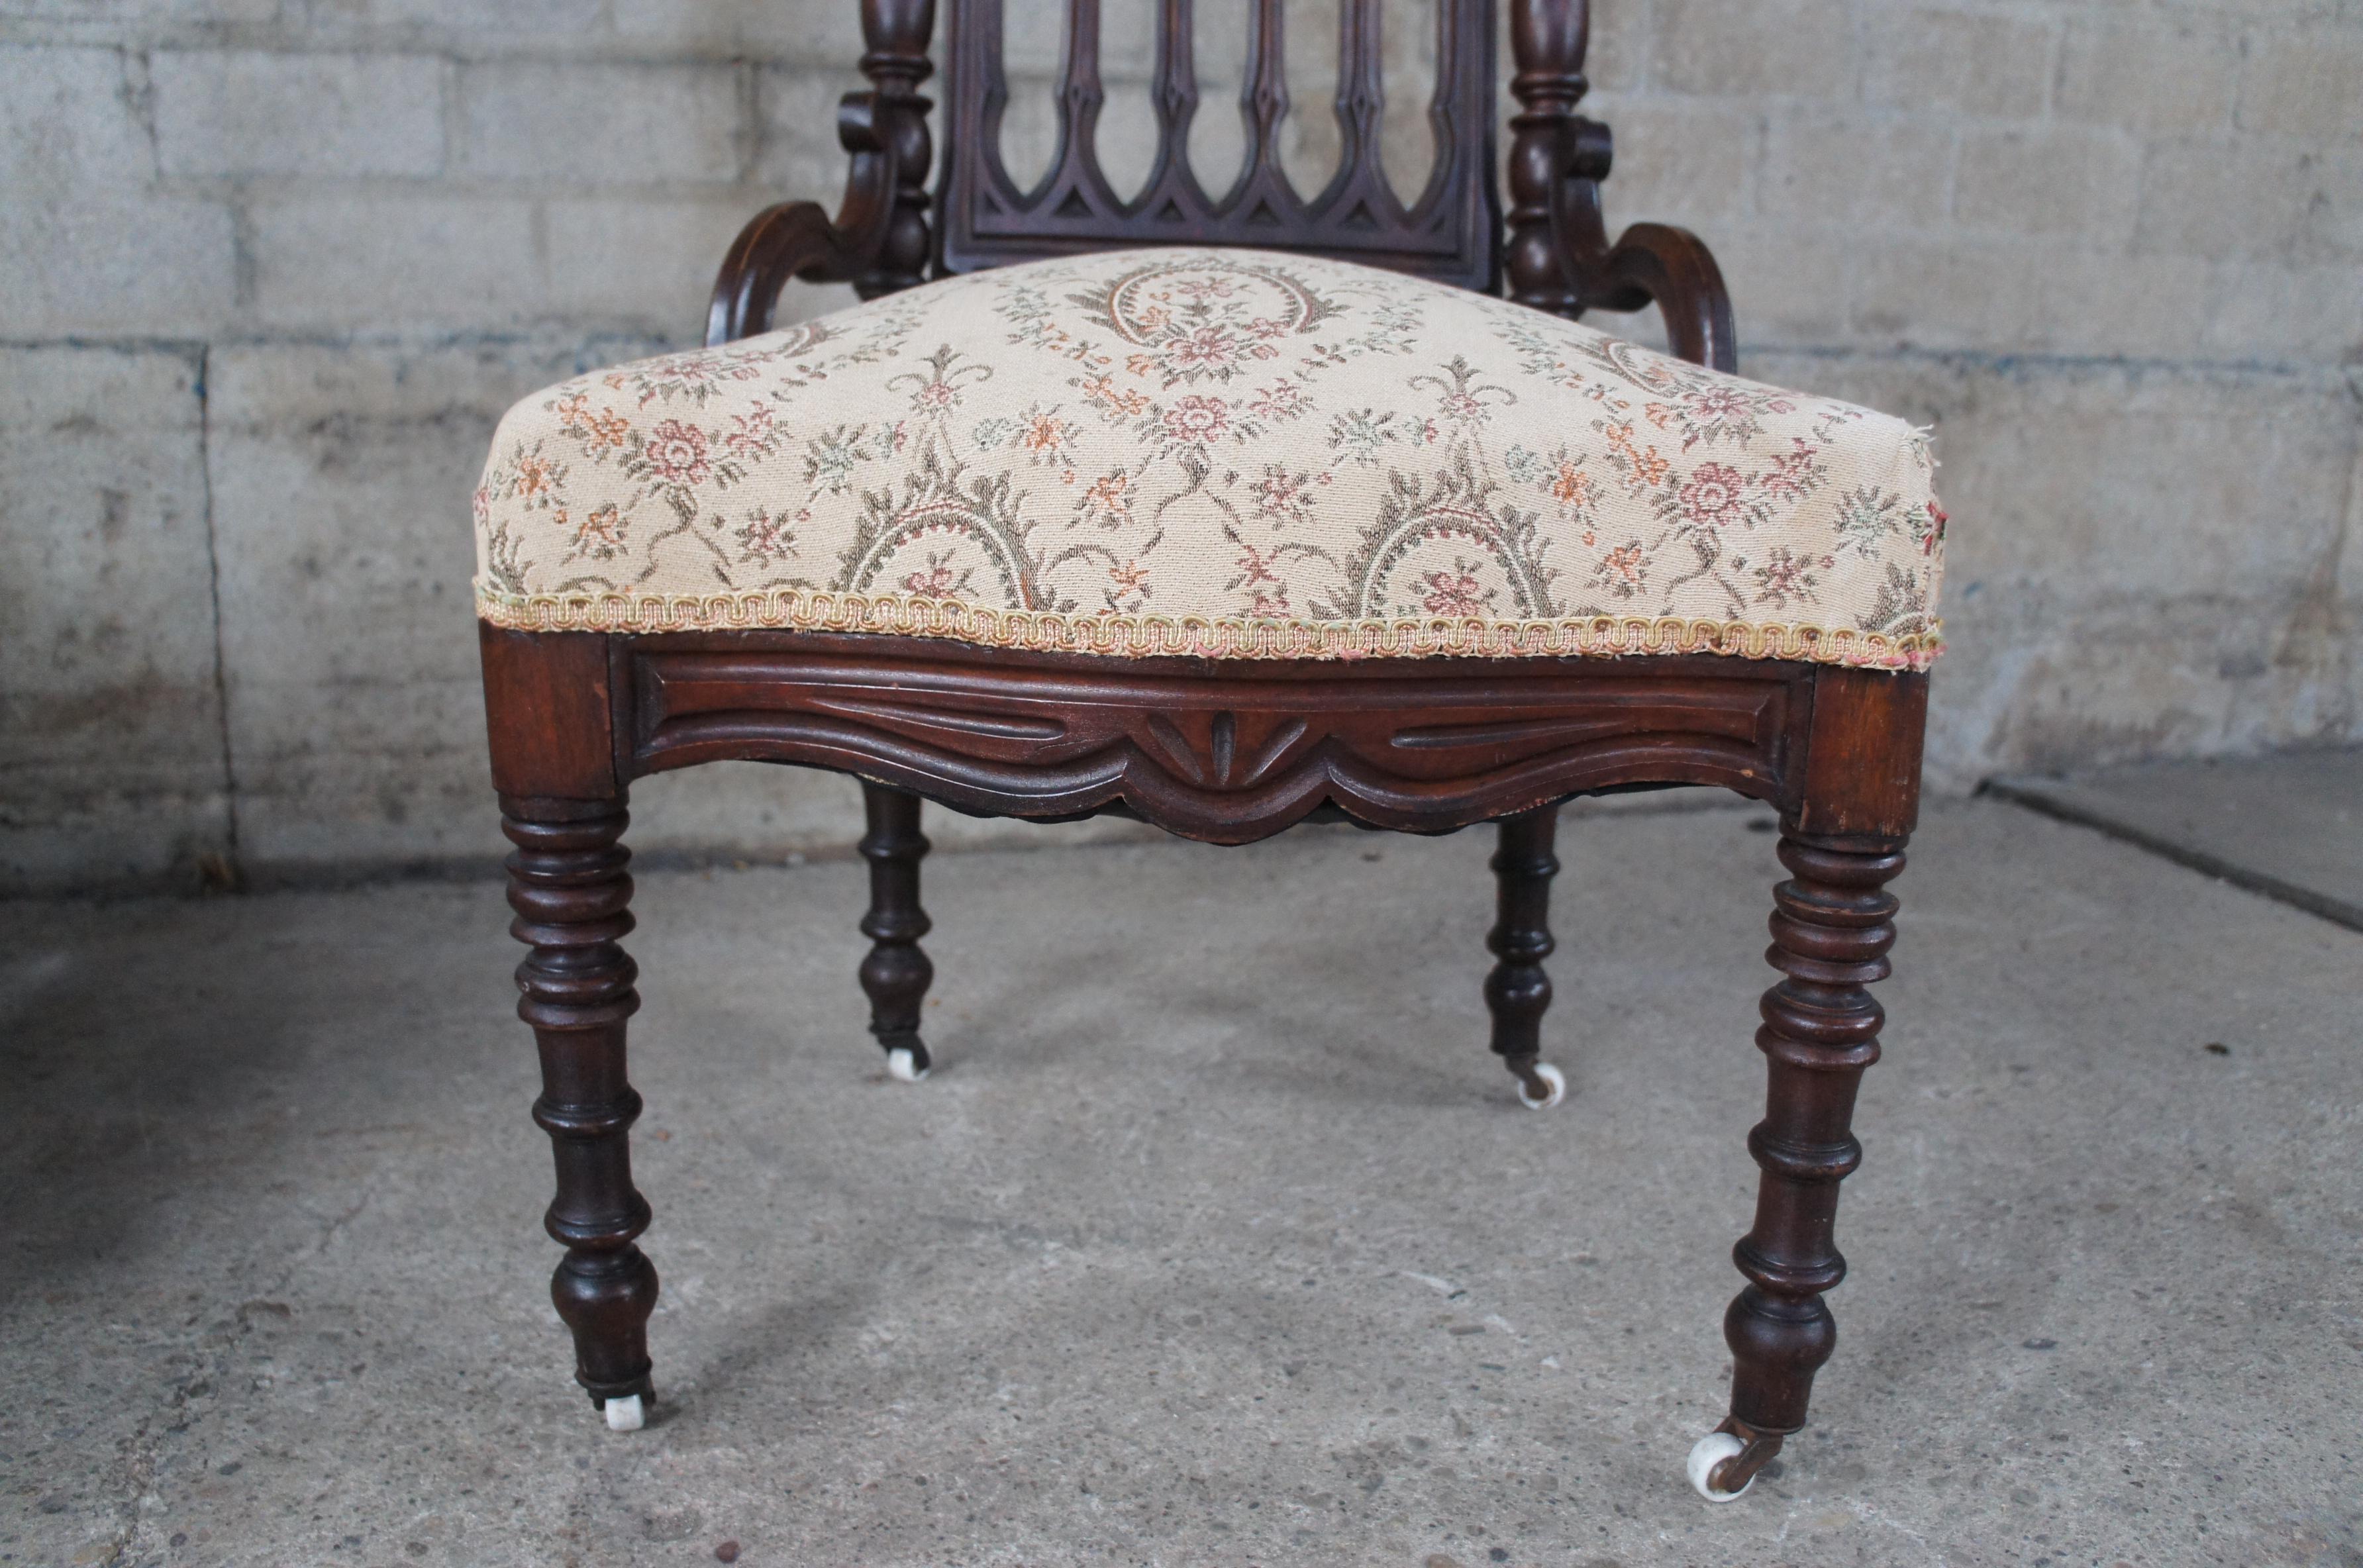 2 Antique Renaissance Gothic Revival Carved Mahogany Throne Dining Chairs For Sale 3